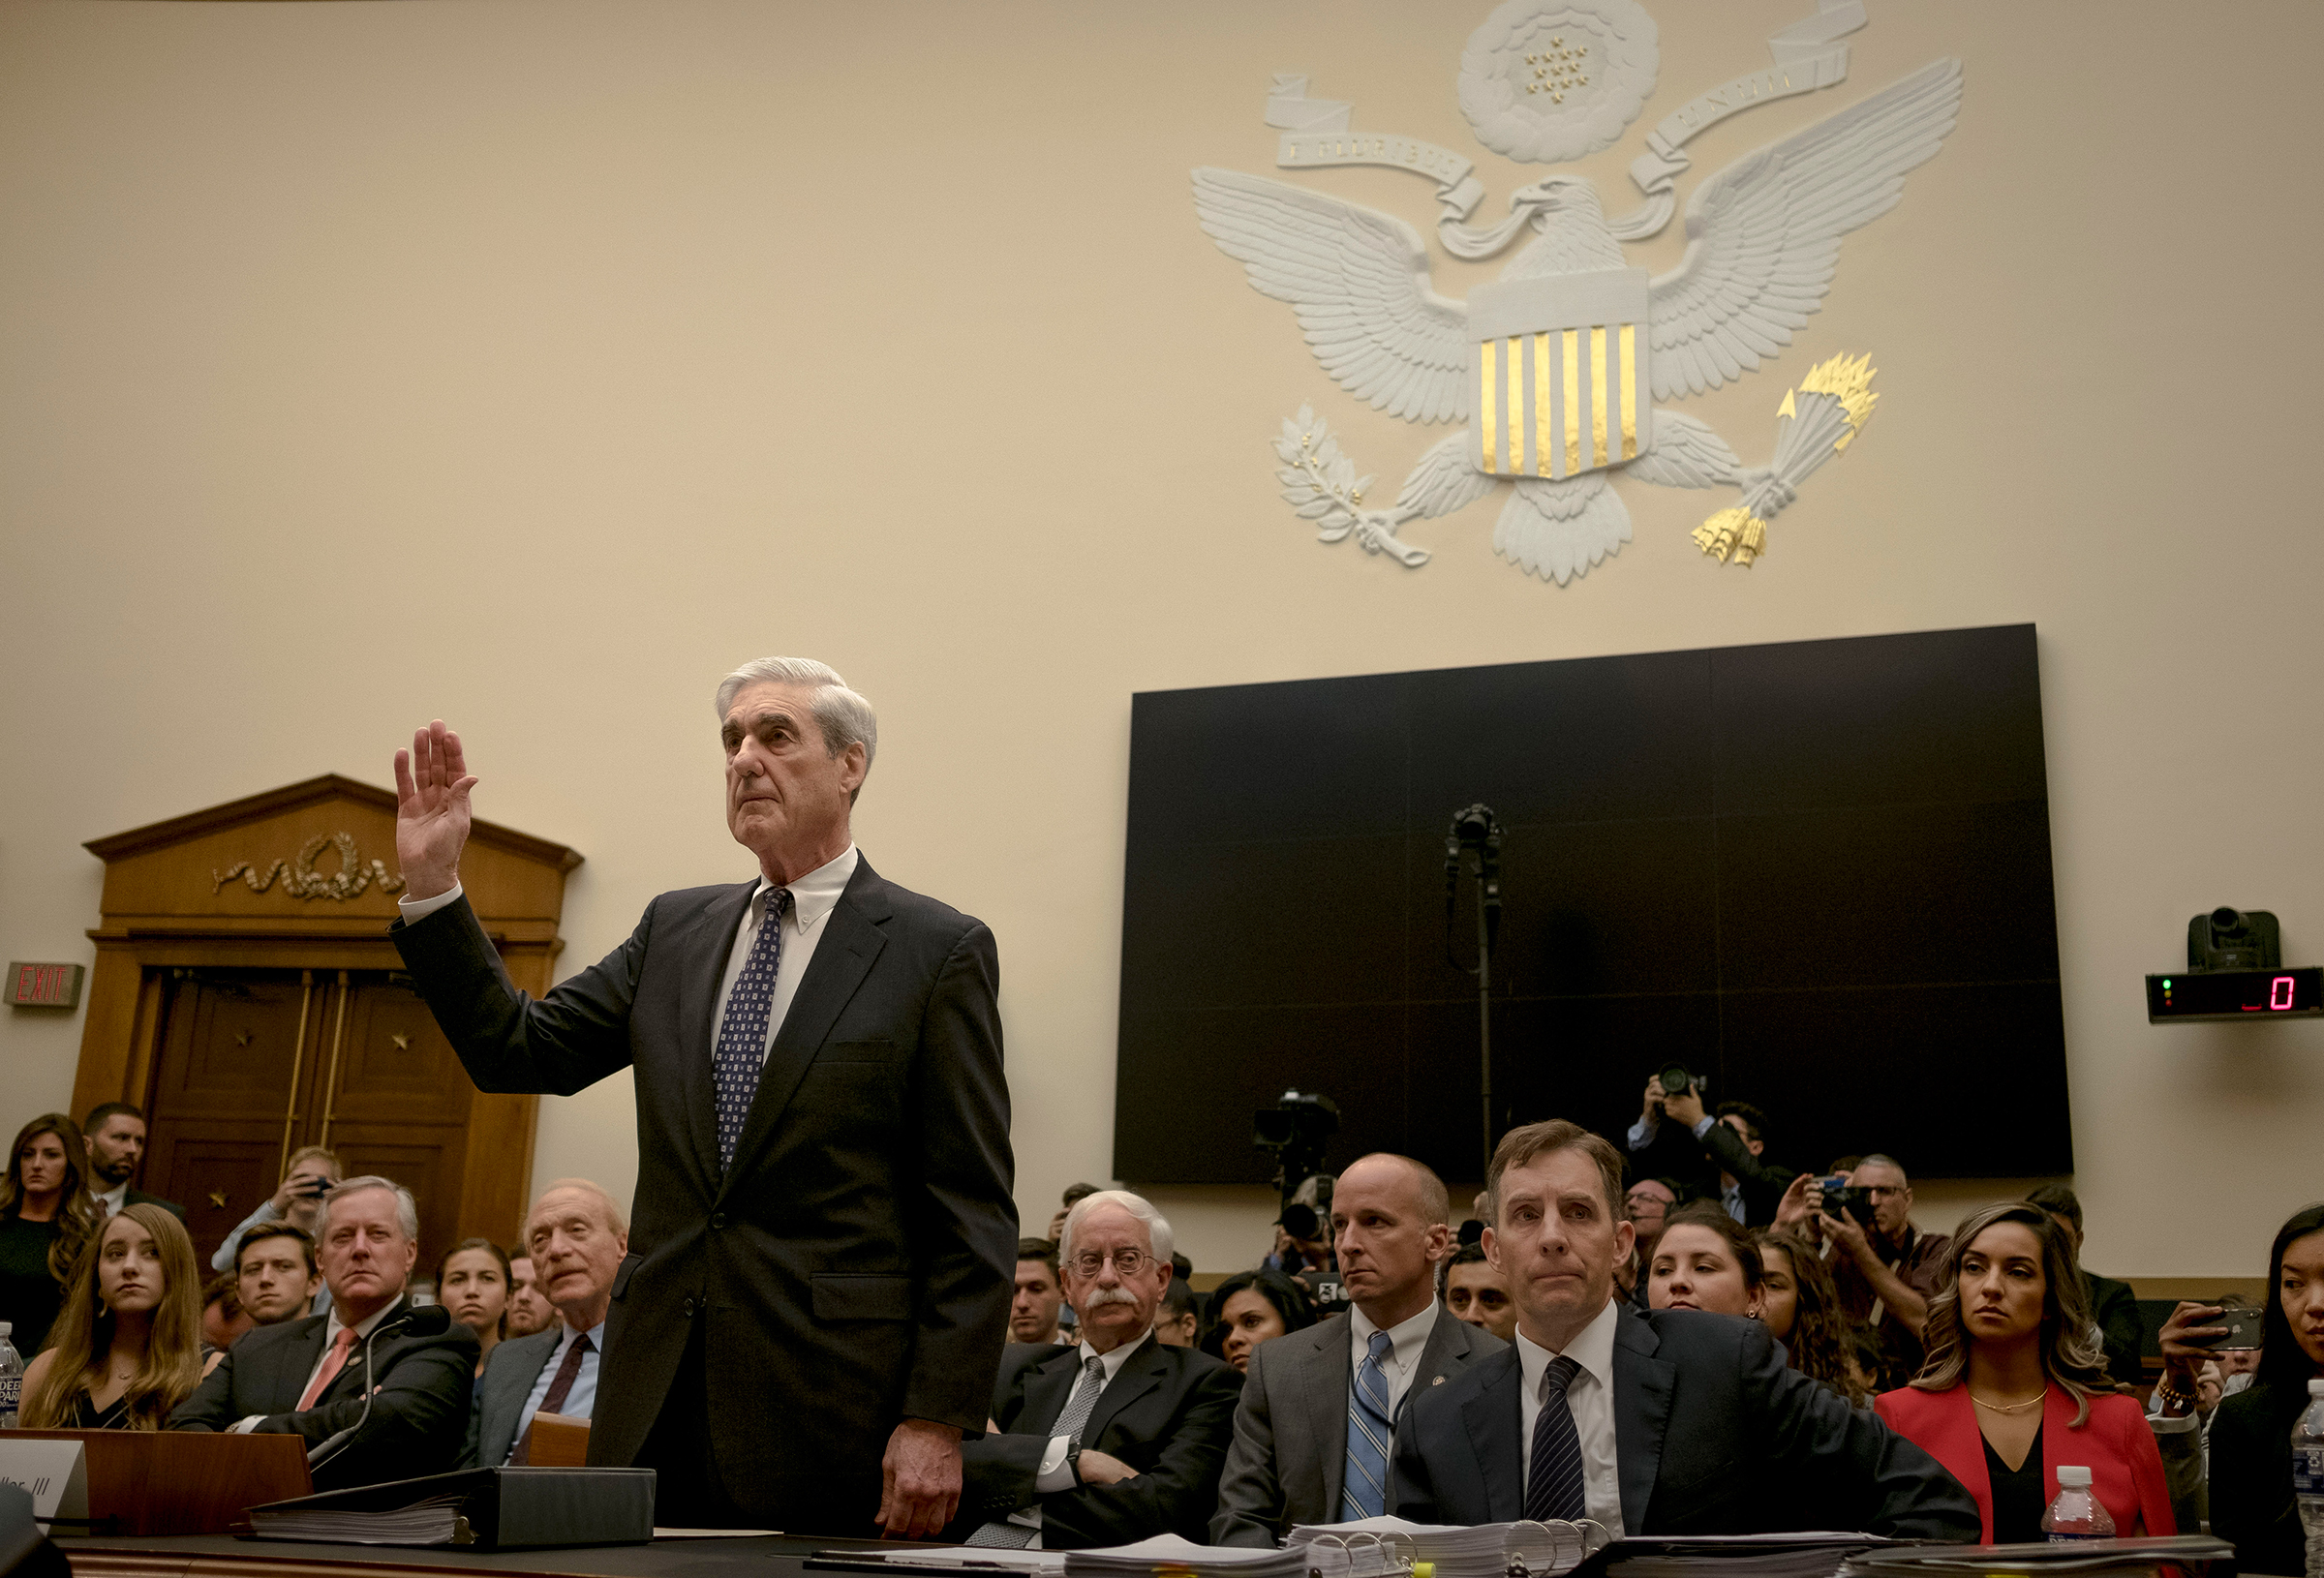 Former Special Counsel Robert Mueller is sworn in before the House Judiciary Committee in Washington, D.C., on July 24, 2019.